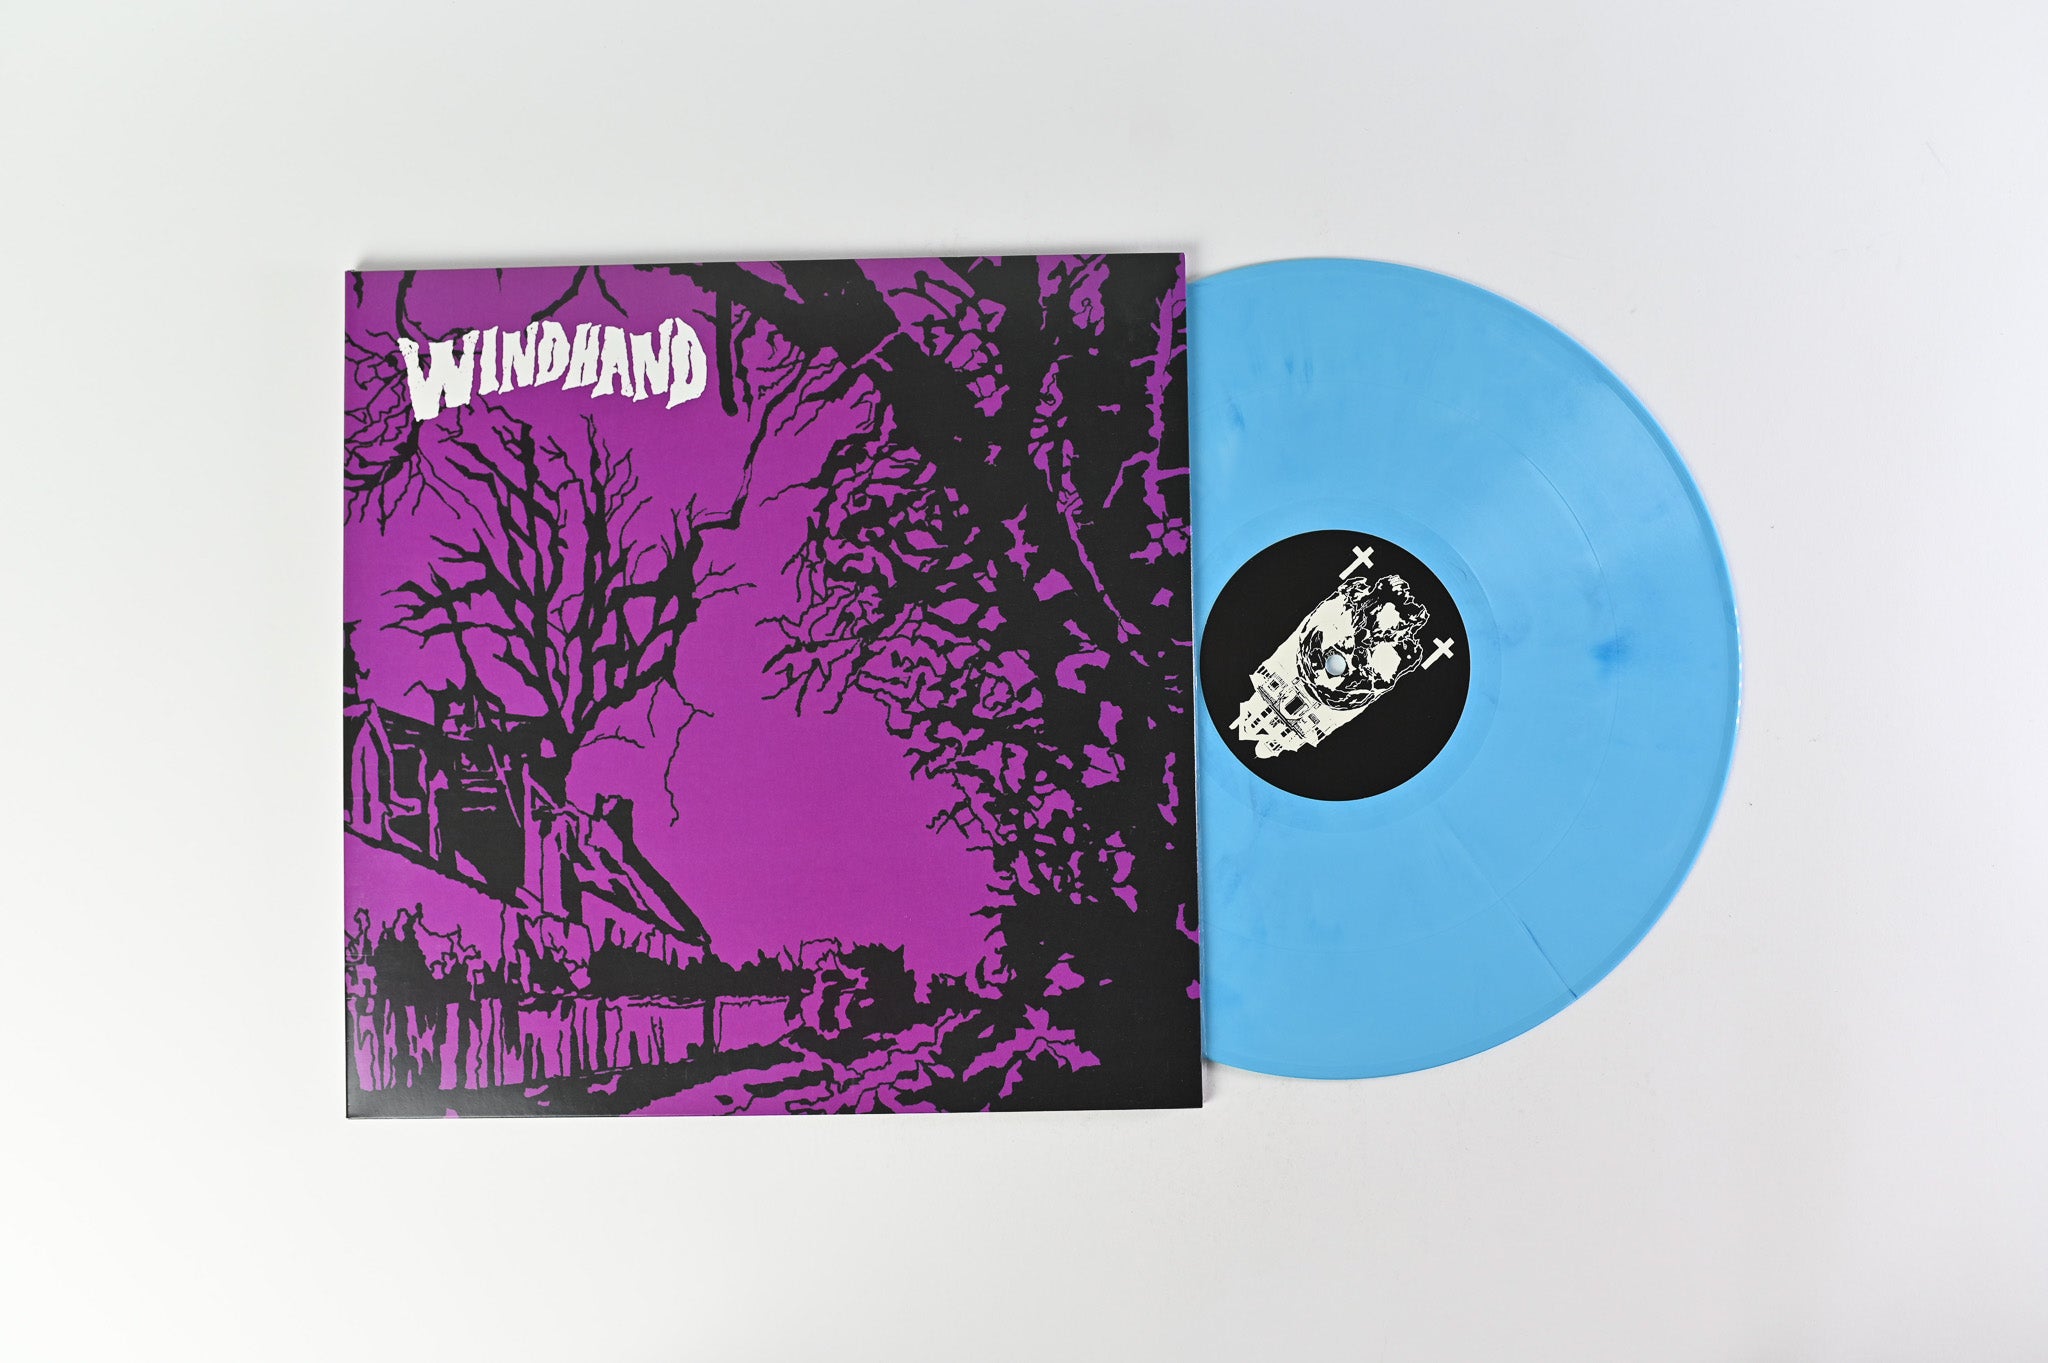 Windhand - Windhand on Forcefield Baby Blue Marbled Vinyl